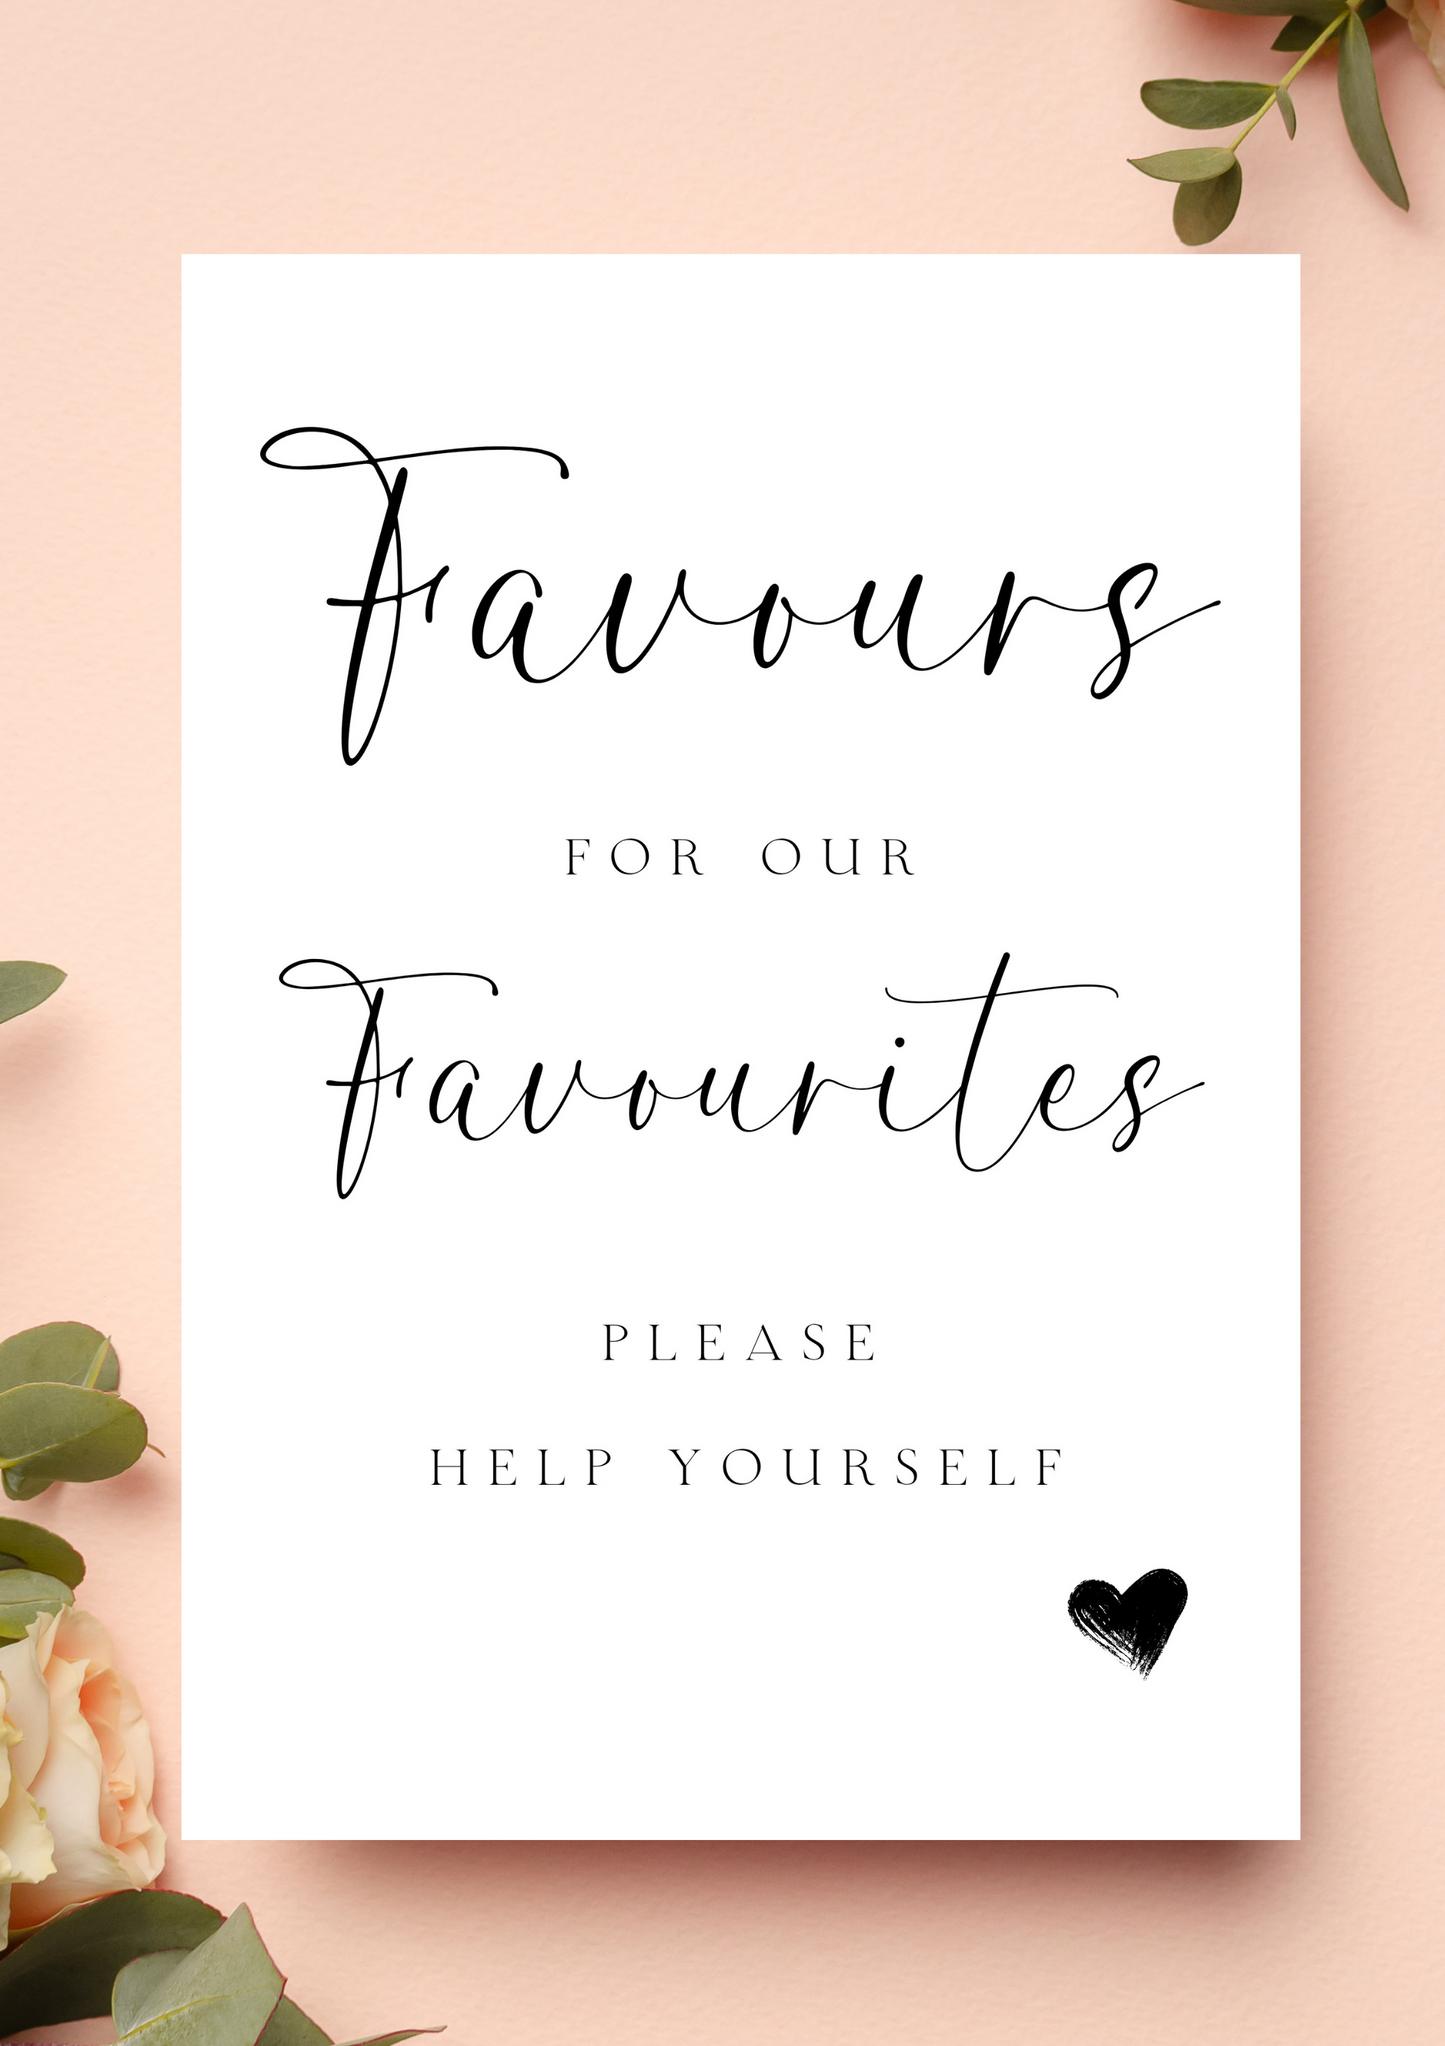 Lucy black - Favours for our favorites sign